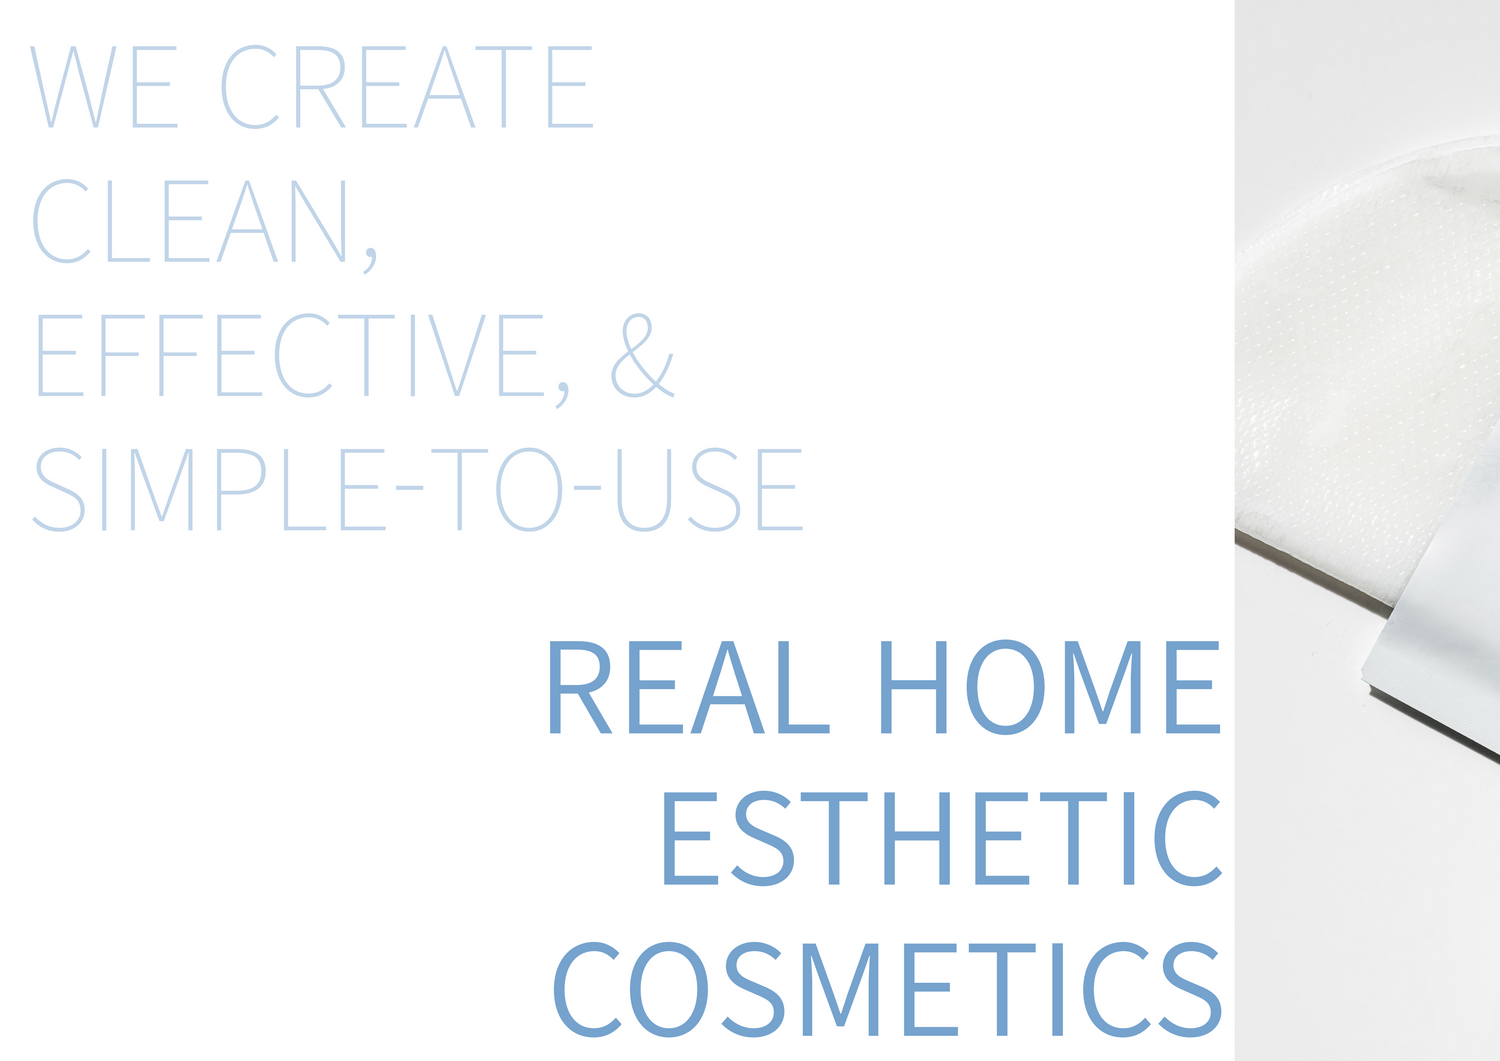 We create, clean, effective, & simple-to-use real hoe esthetic cosmetics. 